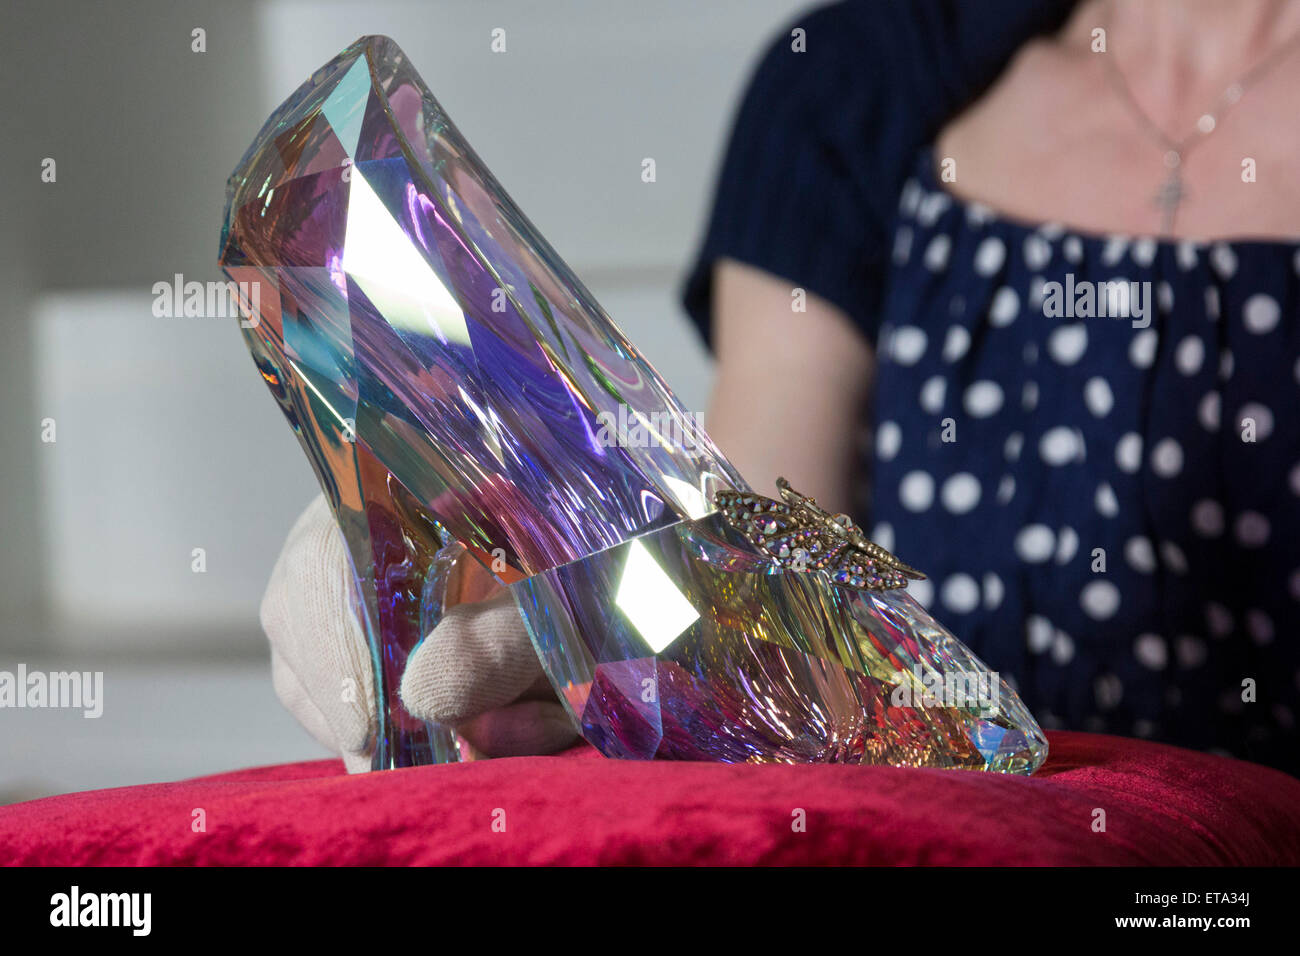 Curator Helen Persson holds Disney's Cinderella slipper ahead of the new  V&A summer fashion exhibition "Shoes: Pleasure and Pain" which focuses on  the transformative power of shoes. The slipper was created by